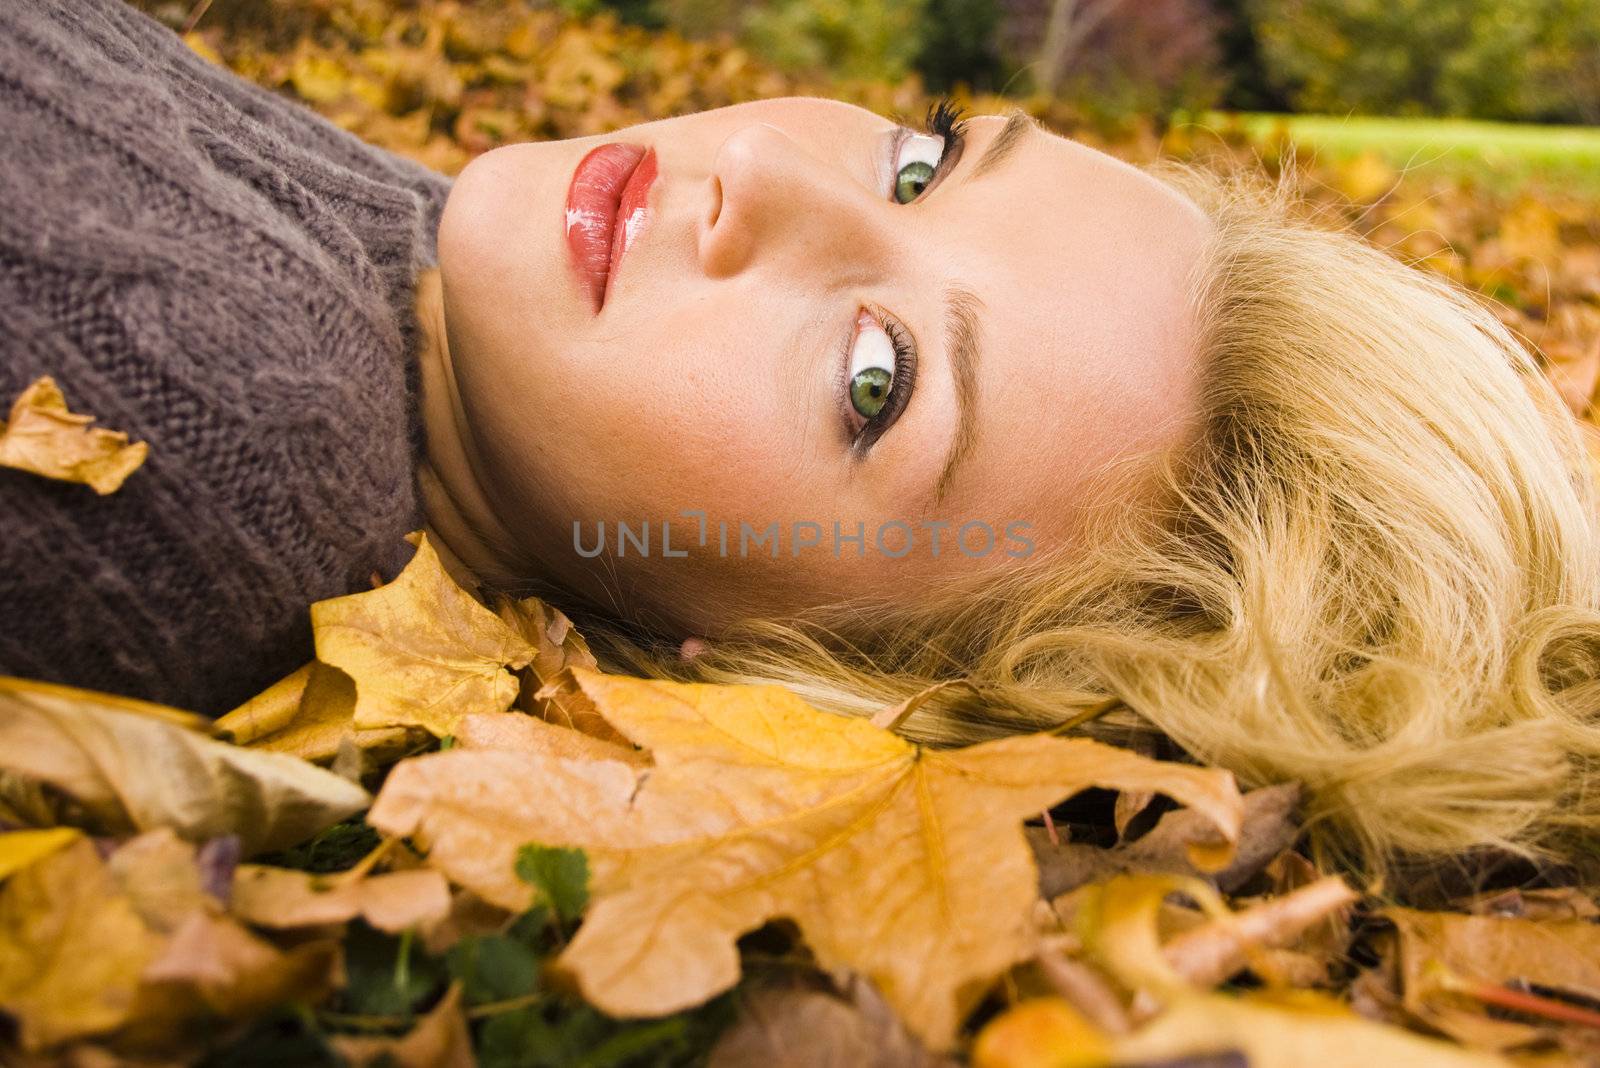 Girl in the Autumn leaves by angietakespics